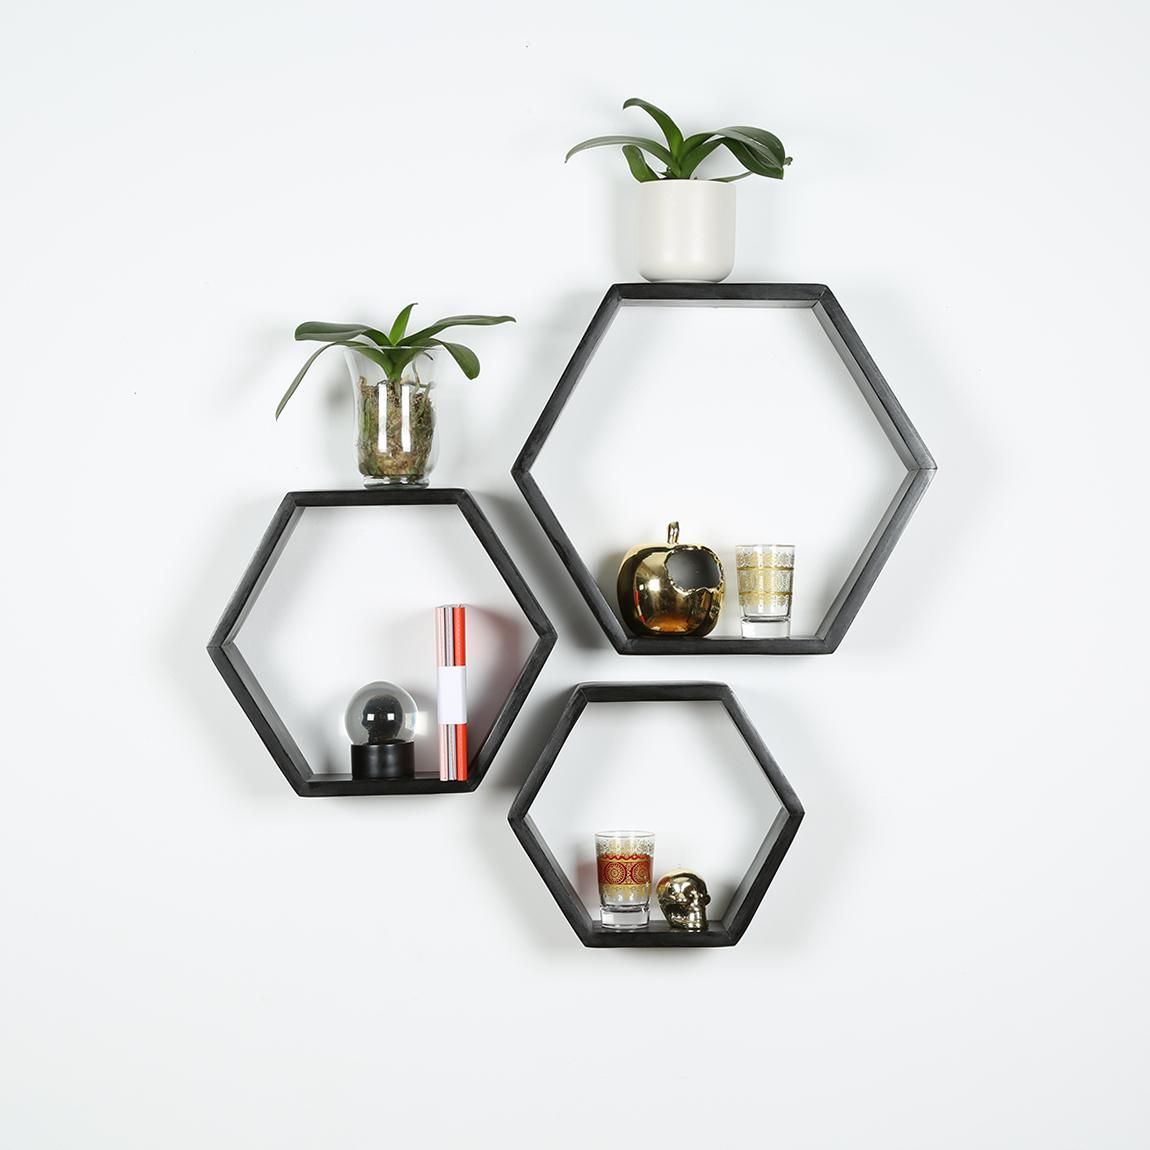 Hexagon Shelf Set Of 3 – Black B&k Design And Decor For Most Up To Date Hexagons Wood Wall Art (View 11 of 20)